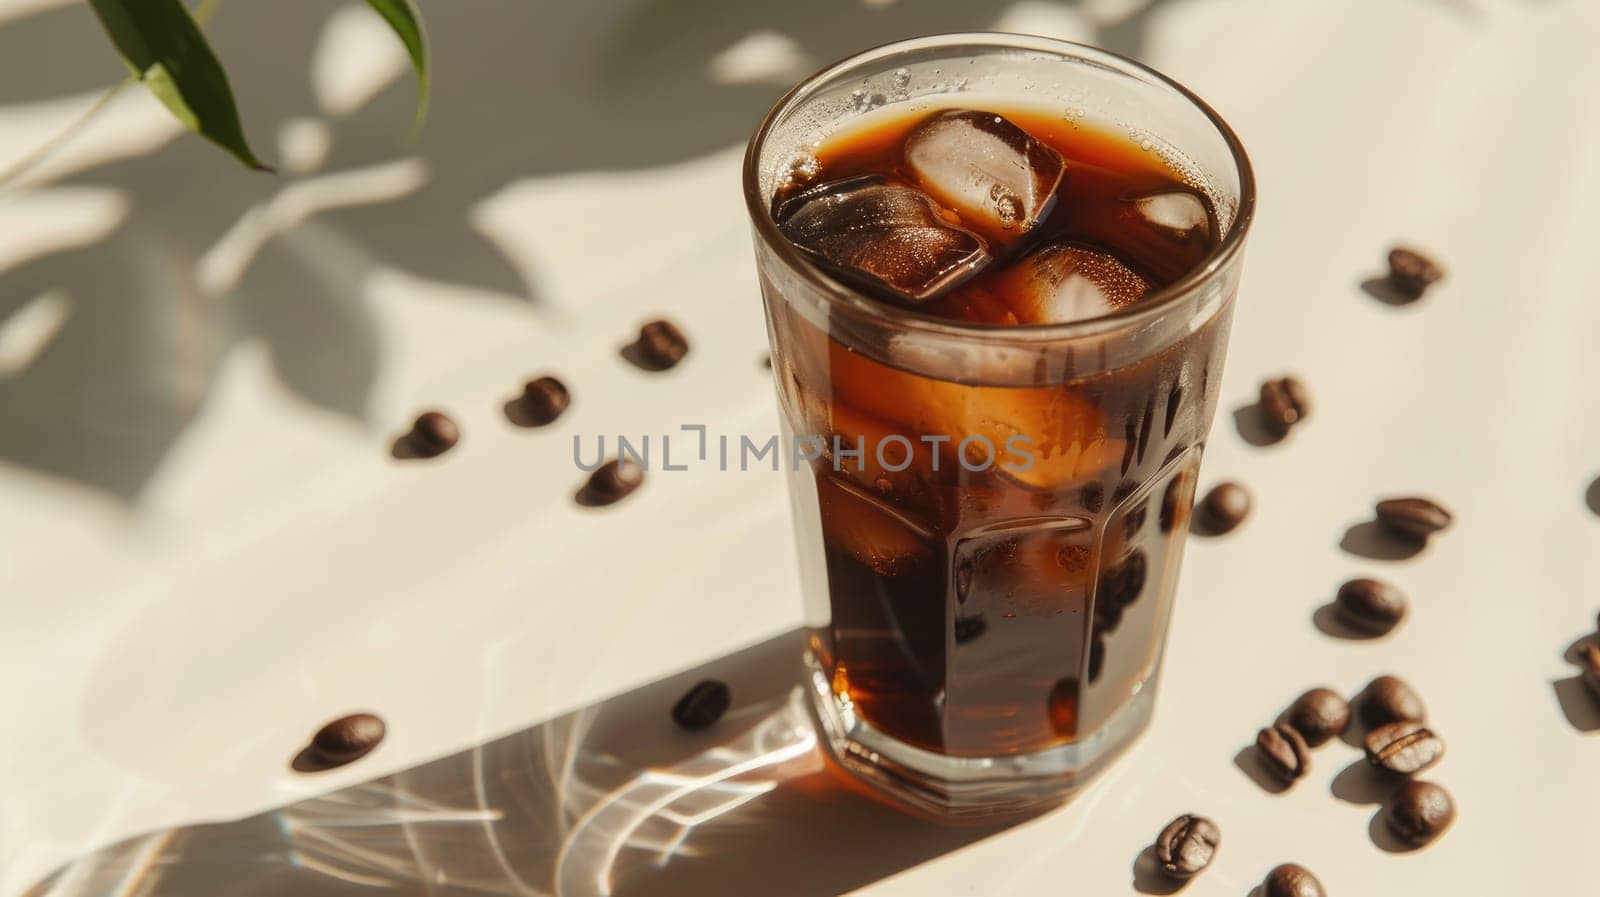 A glass of coffee with ice cubes in it is sitting on a table with coffee beans.